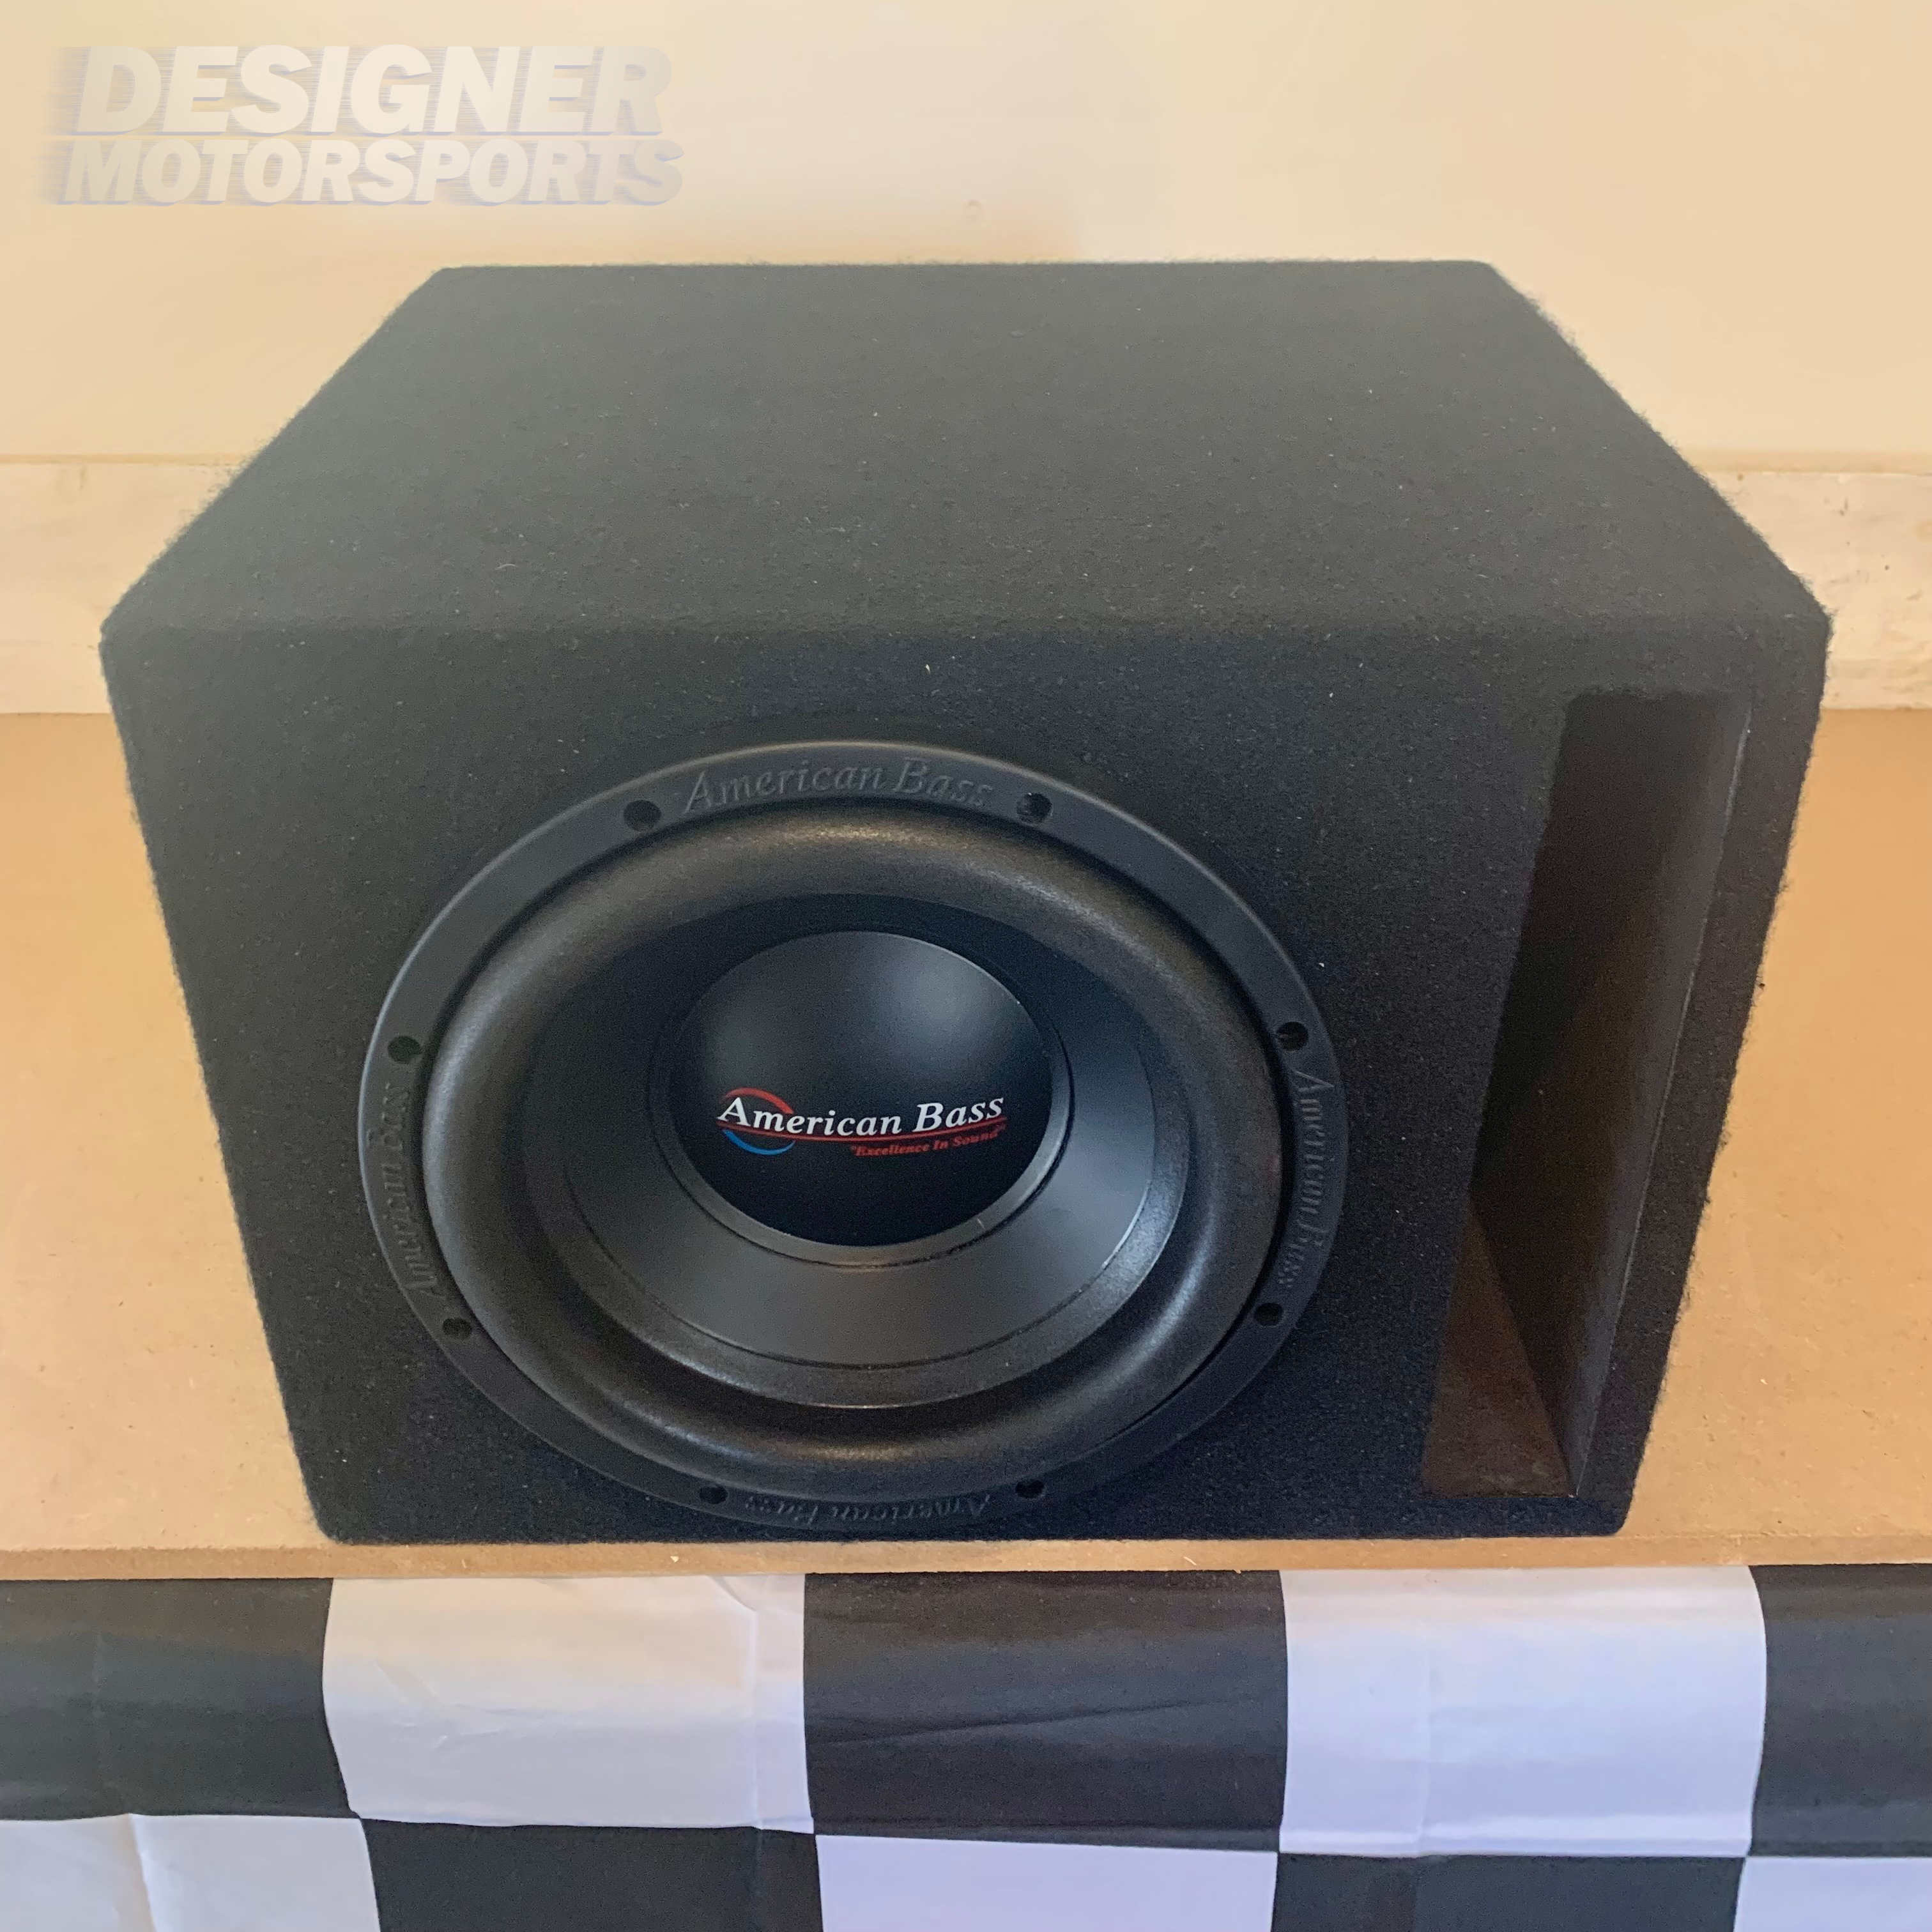 AMERICAN BASS DX104 DX10 10 INCH CAR AUDIO SUBWOOFER